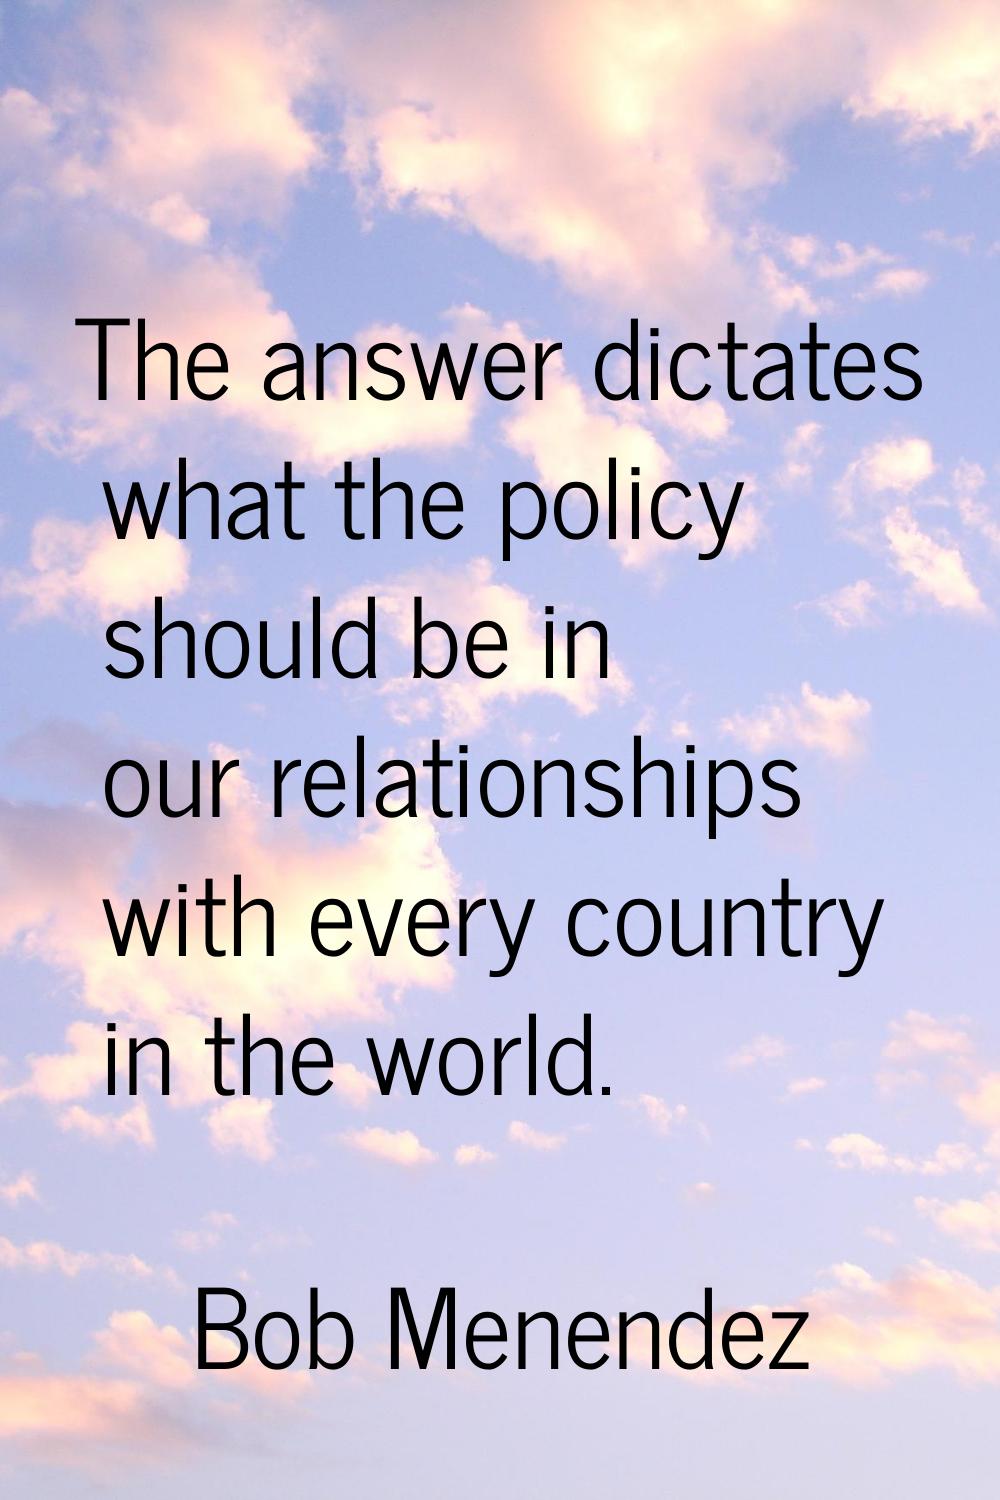 The answer dictates what the policy should be in our relationships with every country in the world.